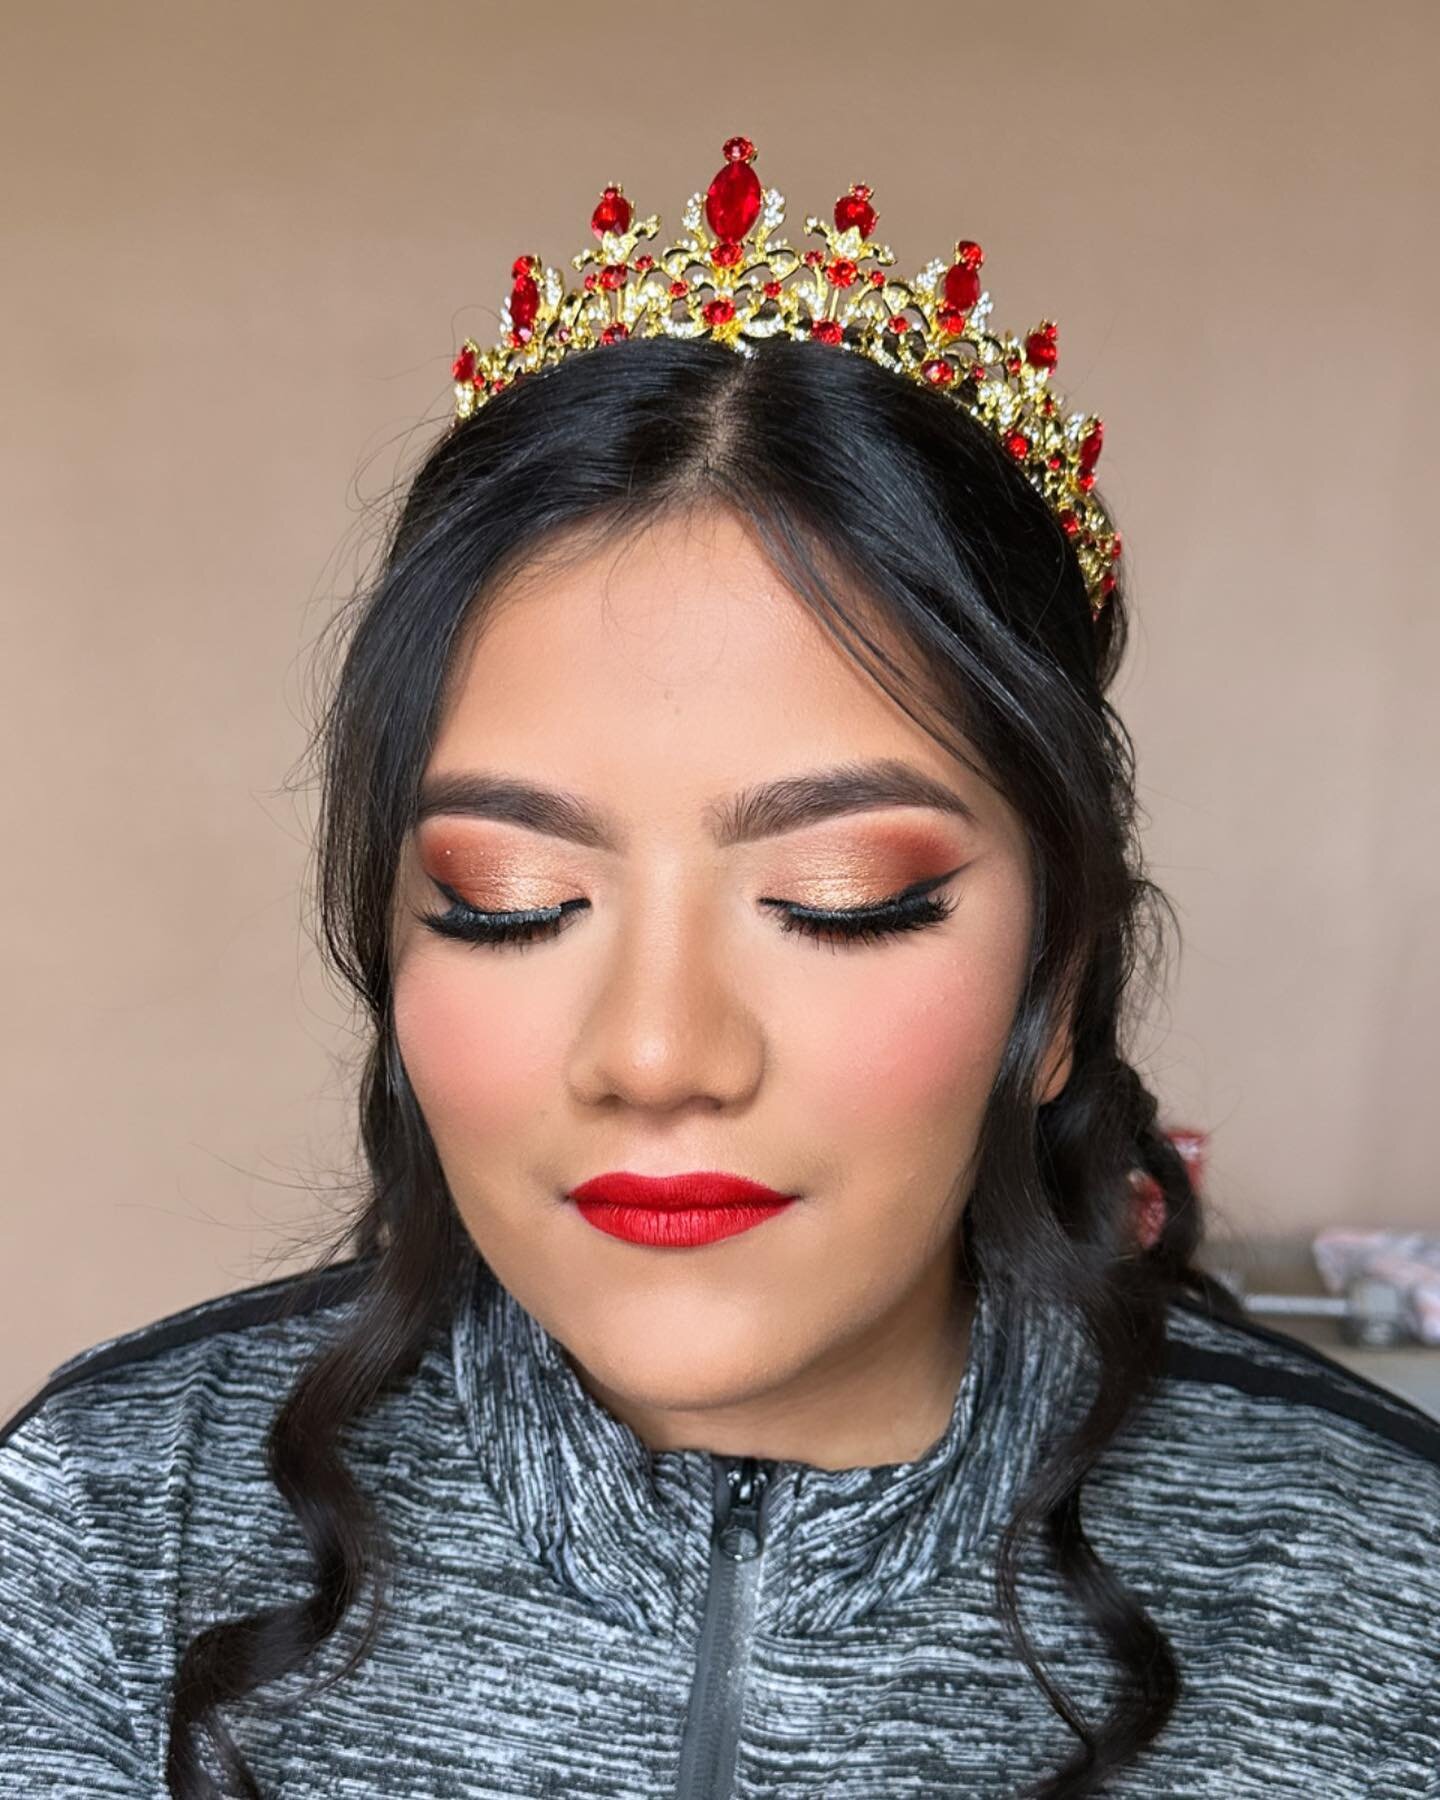 Another pretty  quincea&ntilde;era ready for shoot!

To book our  hair and makeup team visit www.beautyhourlv.com 
#maquillajelasvegas #weddingmakeuplasvegas #weddinghair #lasvegas #lasvegashairstylist #lasvegashair #lasvegasmua #vegasmua #lvmua #mua